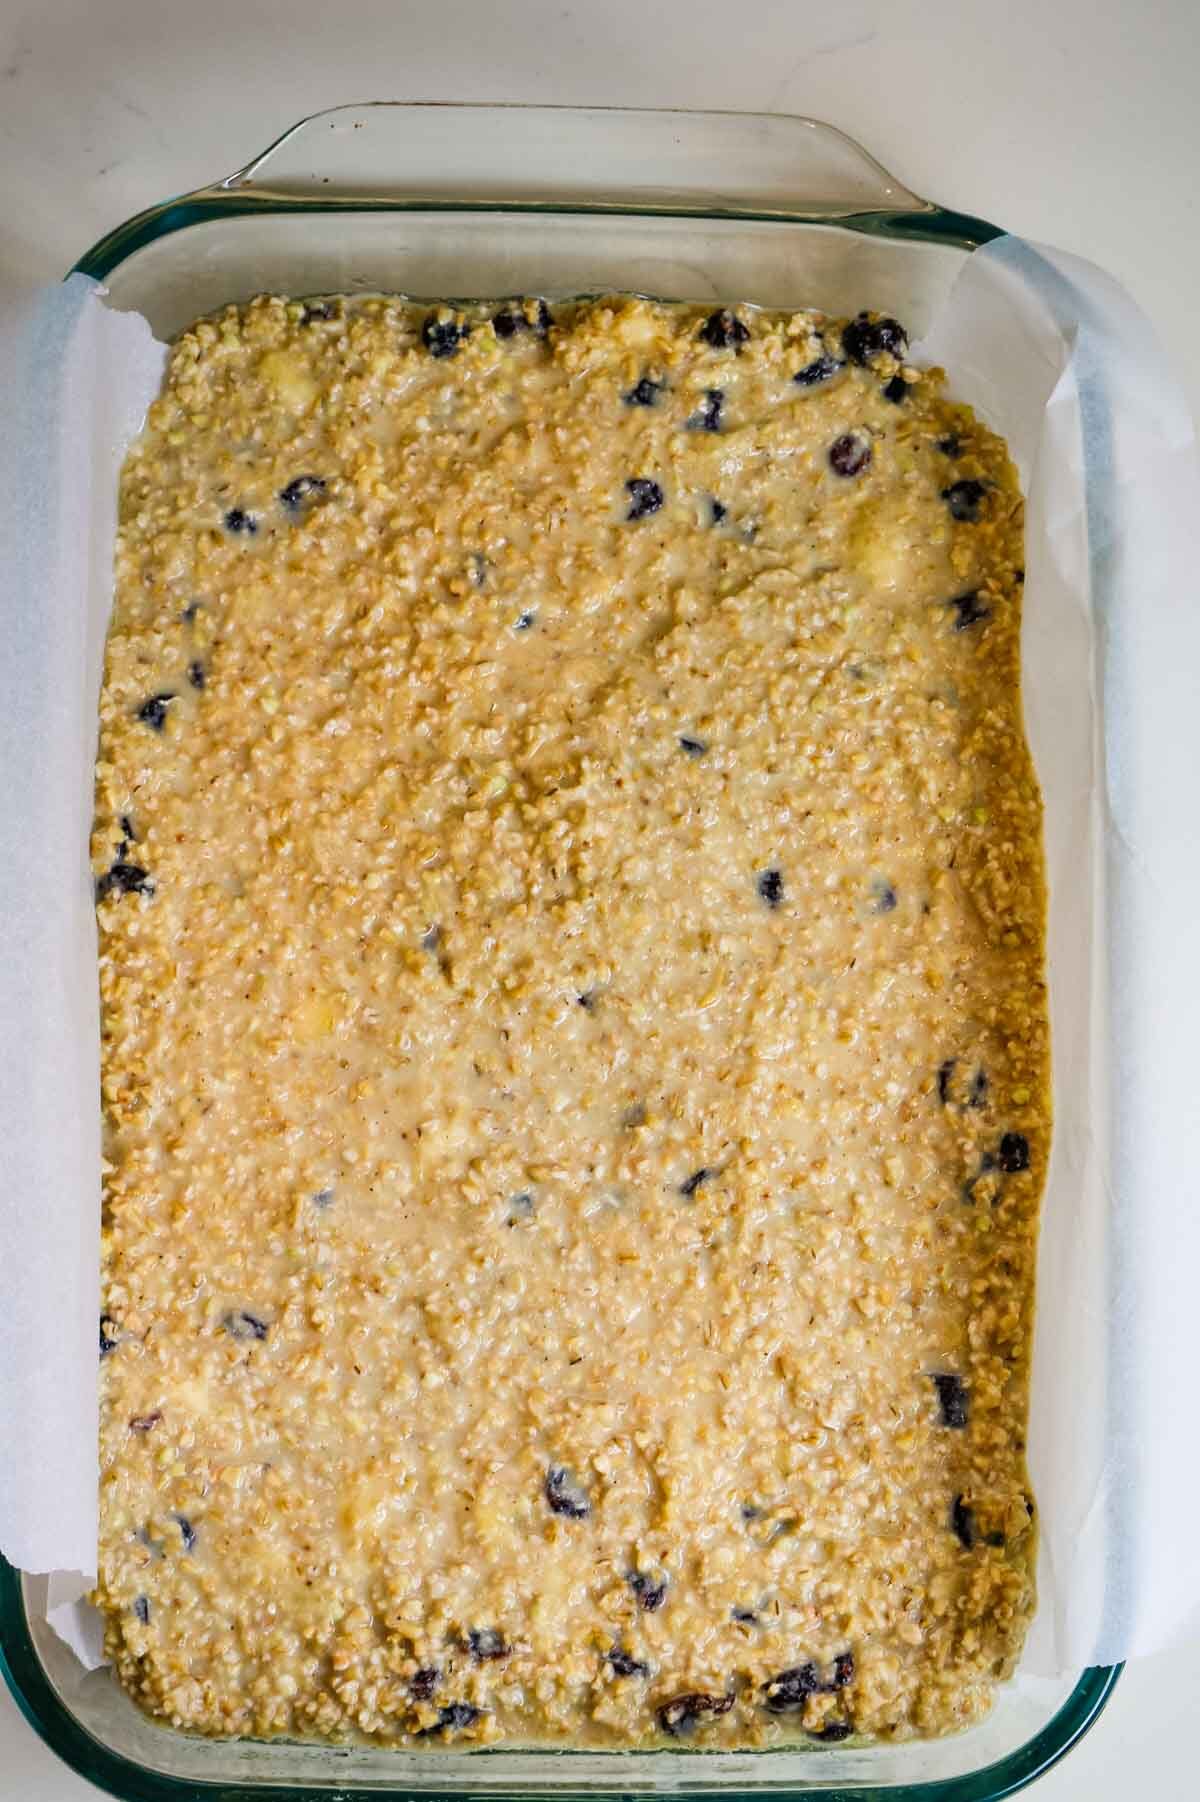 uncooked protein oats in a metal baking pan on parchment paper